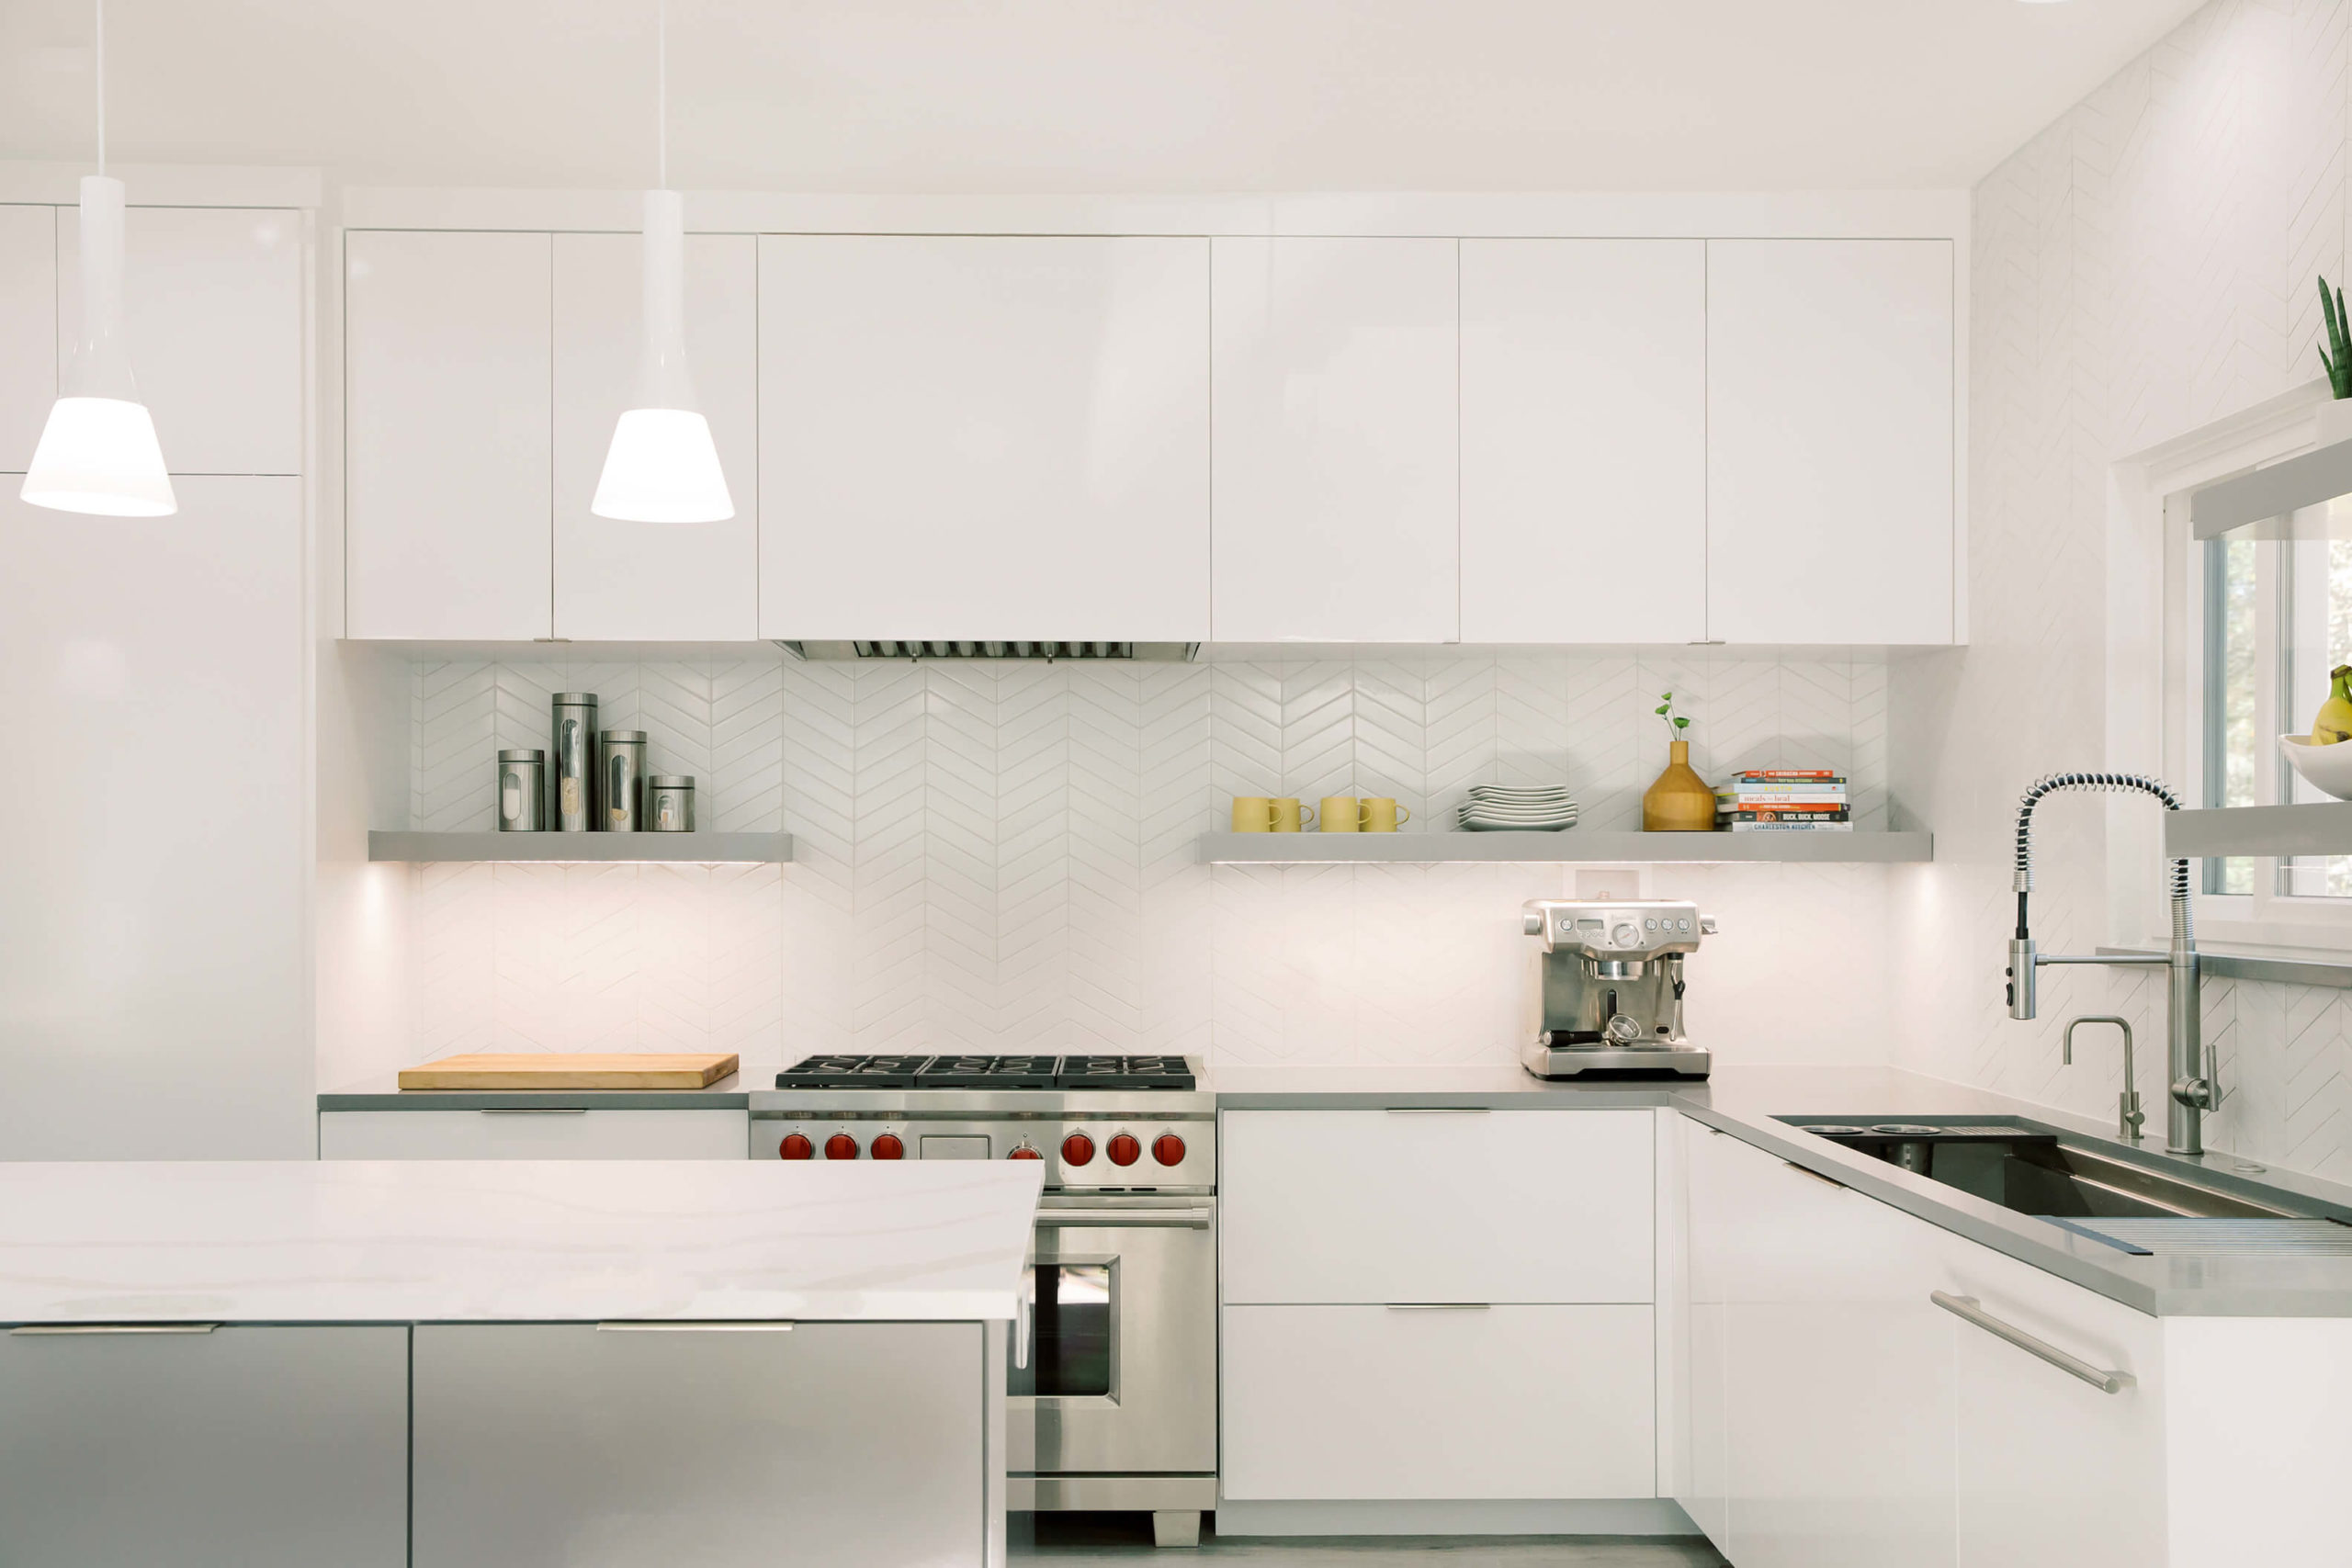 8 Items to Modernize Your Kitchen